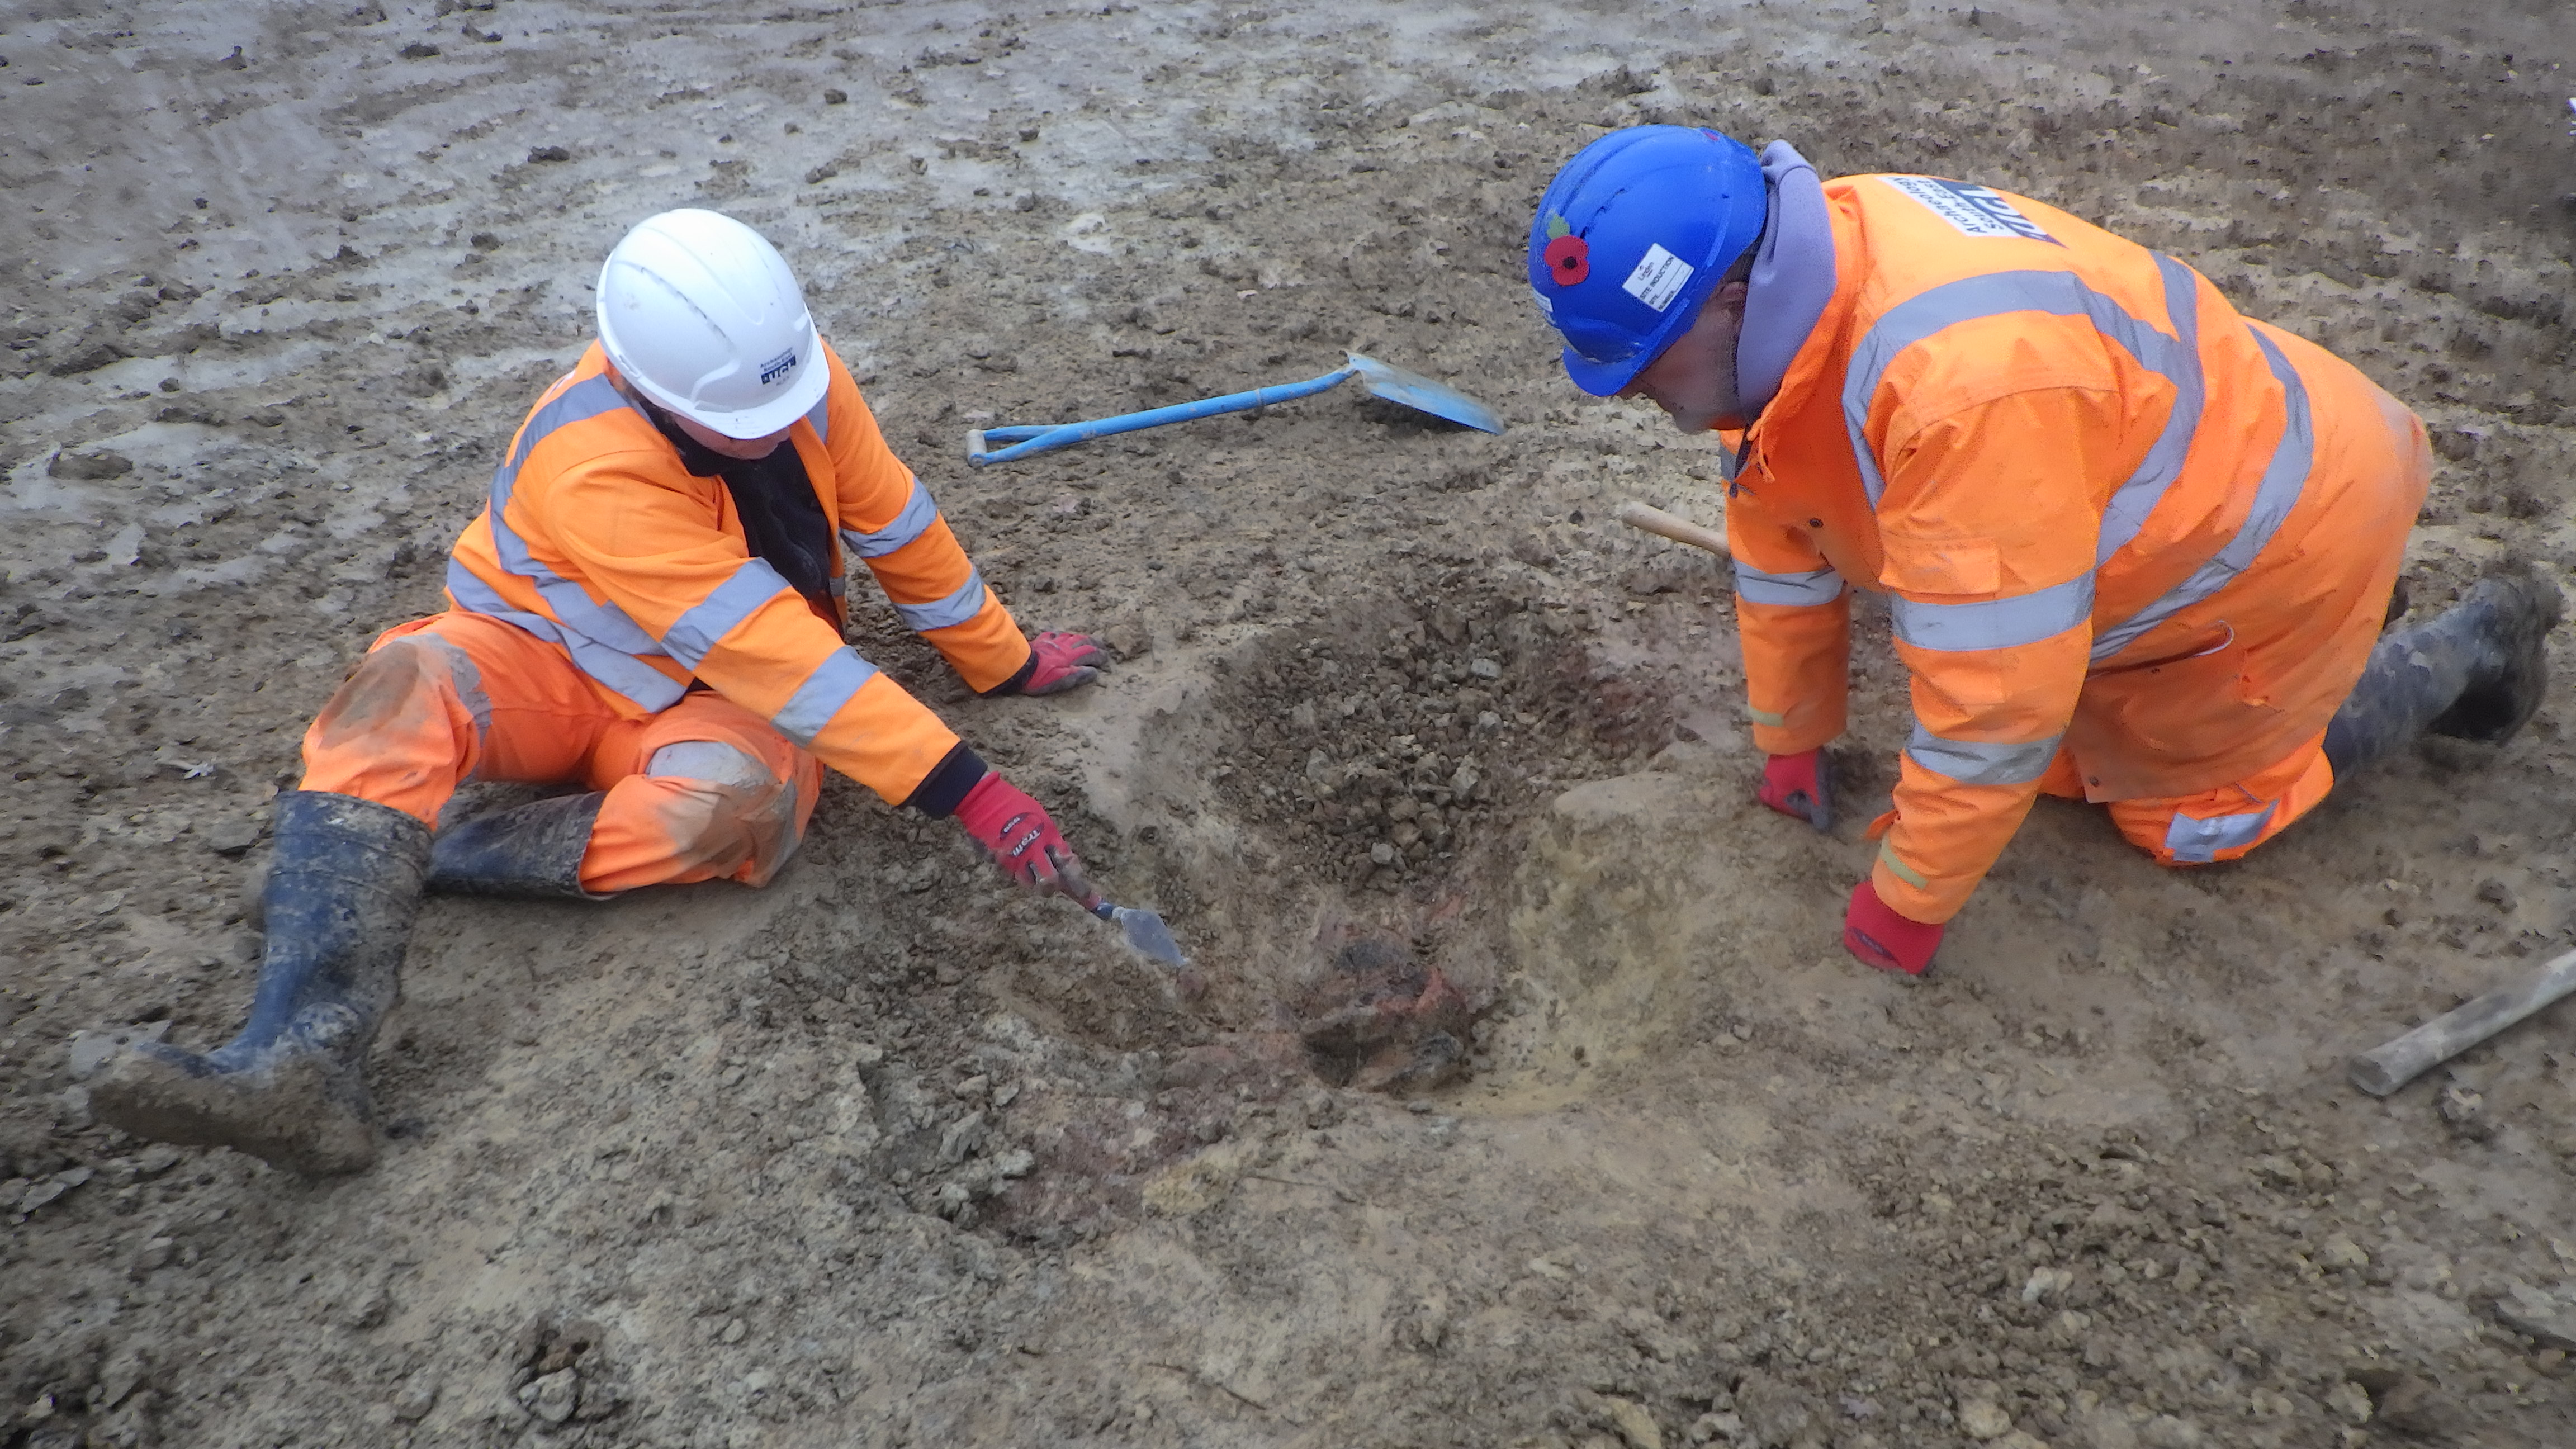 Two men wearing high vis clothing and hard hats sit on the muddy ground looking into a just-dug hole. Alex, on the left, points with his trowel at something reddish in the hole.